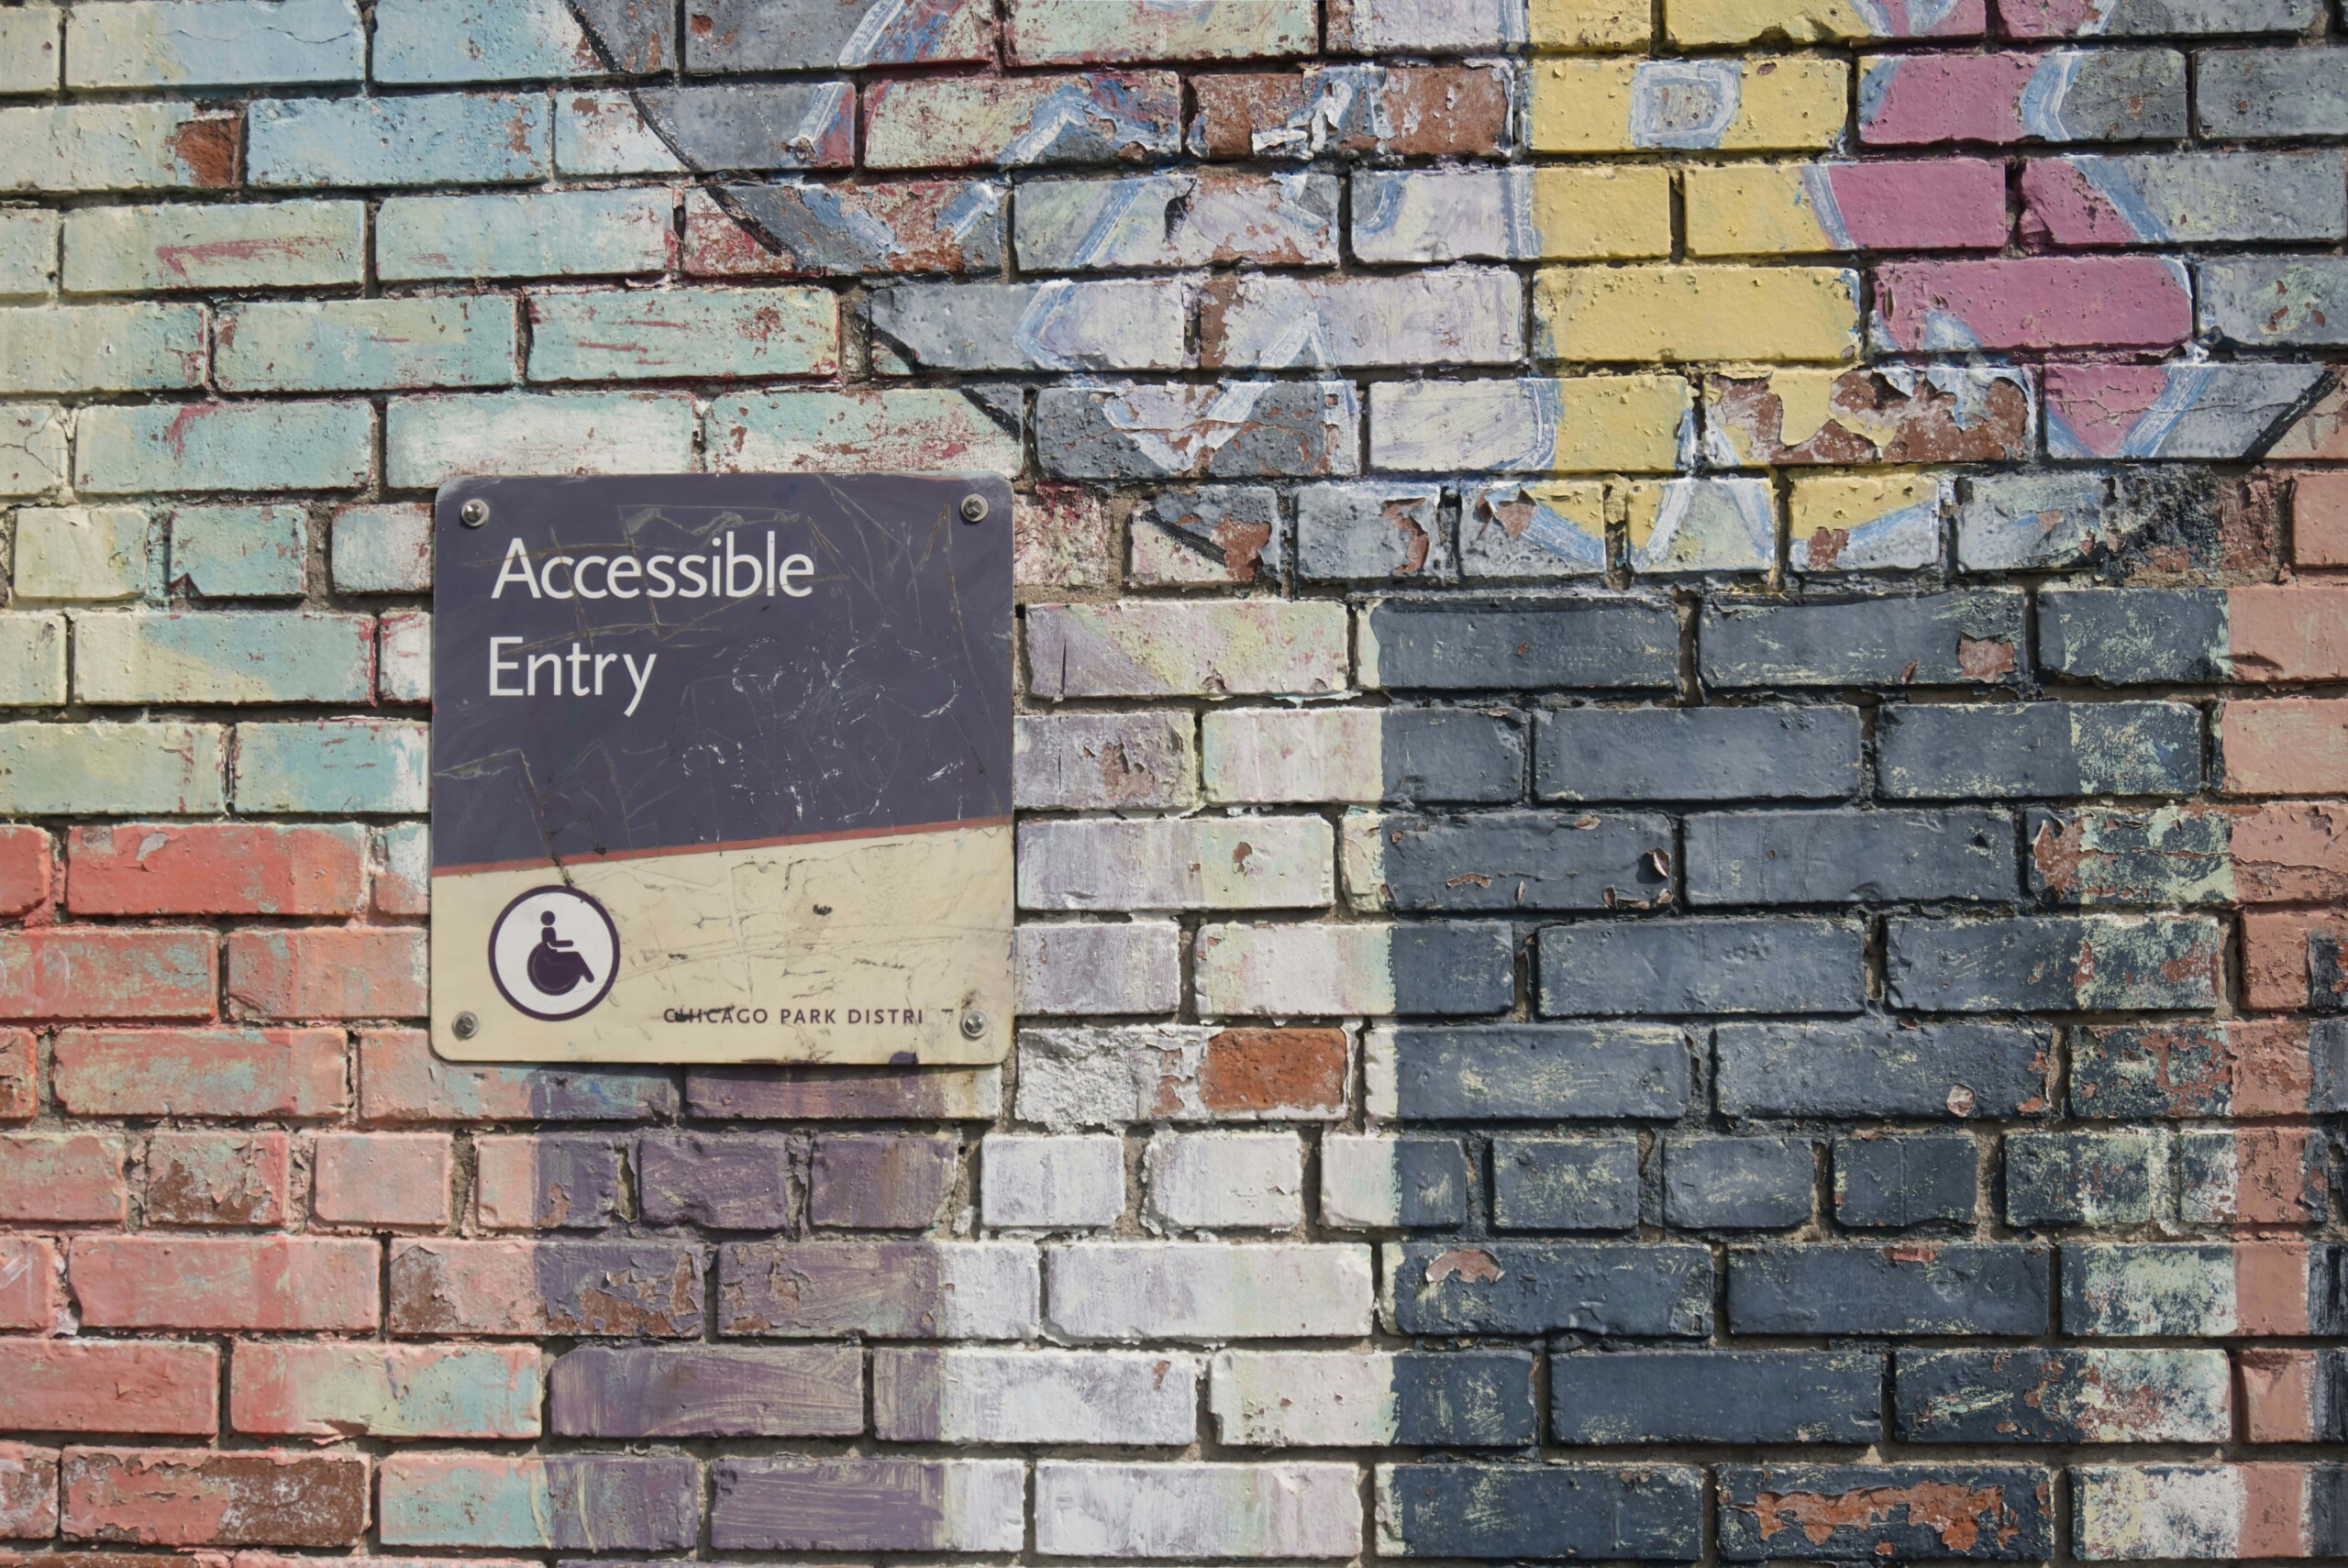 A brick wall with a sign that reads 'Accessible Entry'.